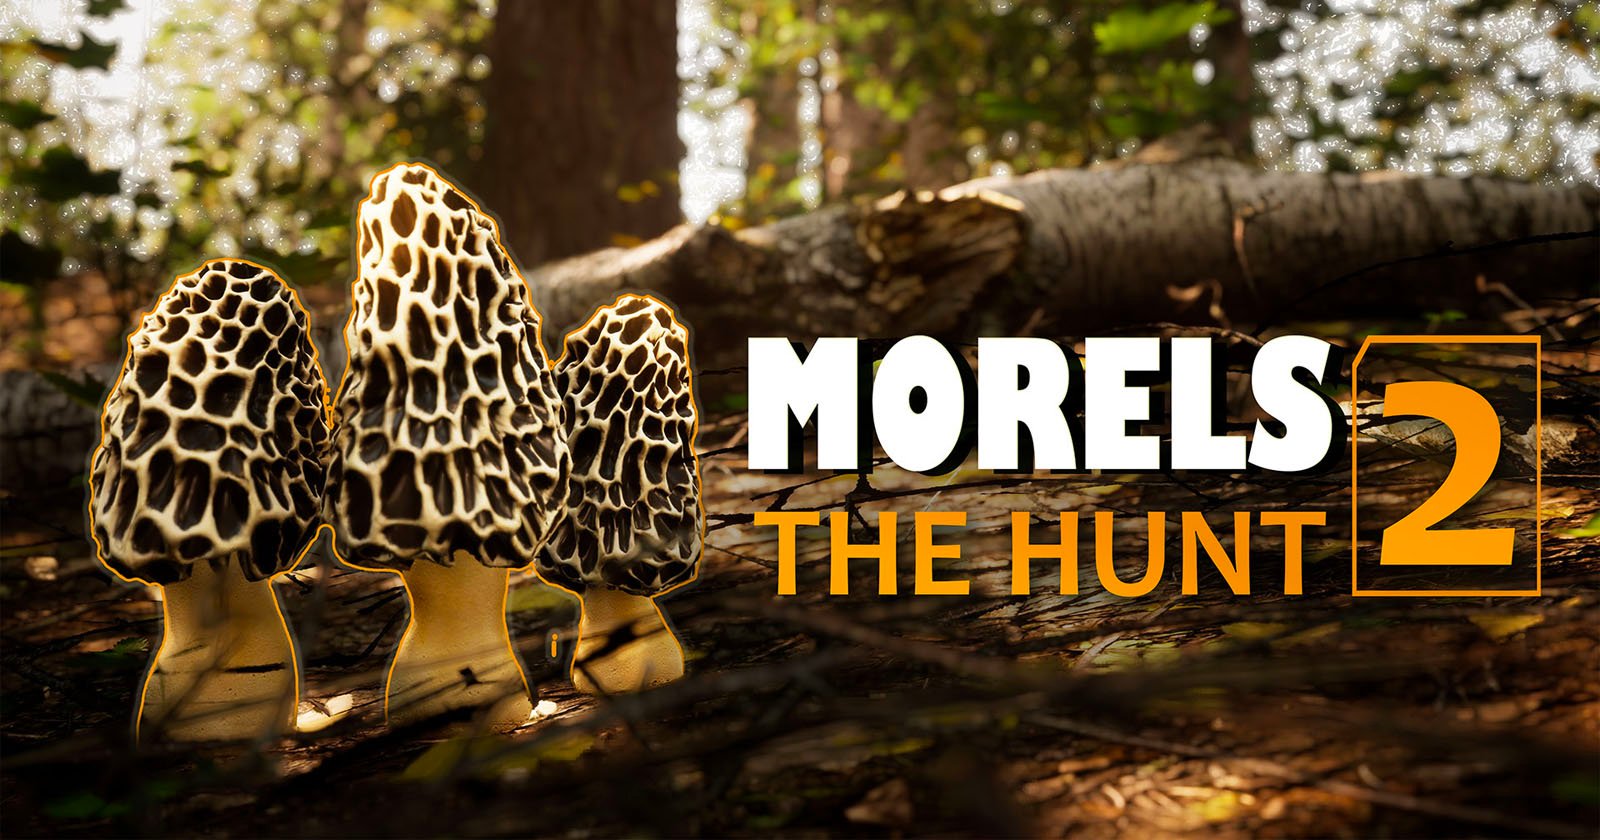 Morels 2 Combines Mushroom Hunting and Wildlife Photography into One Game